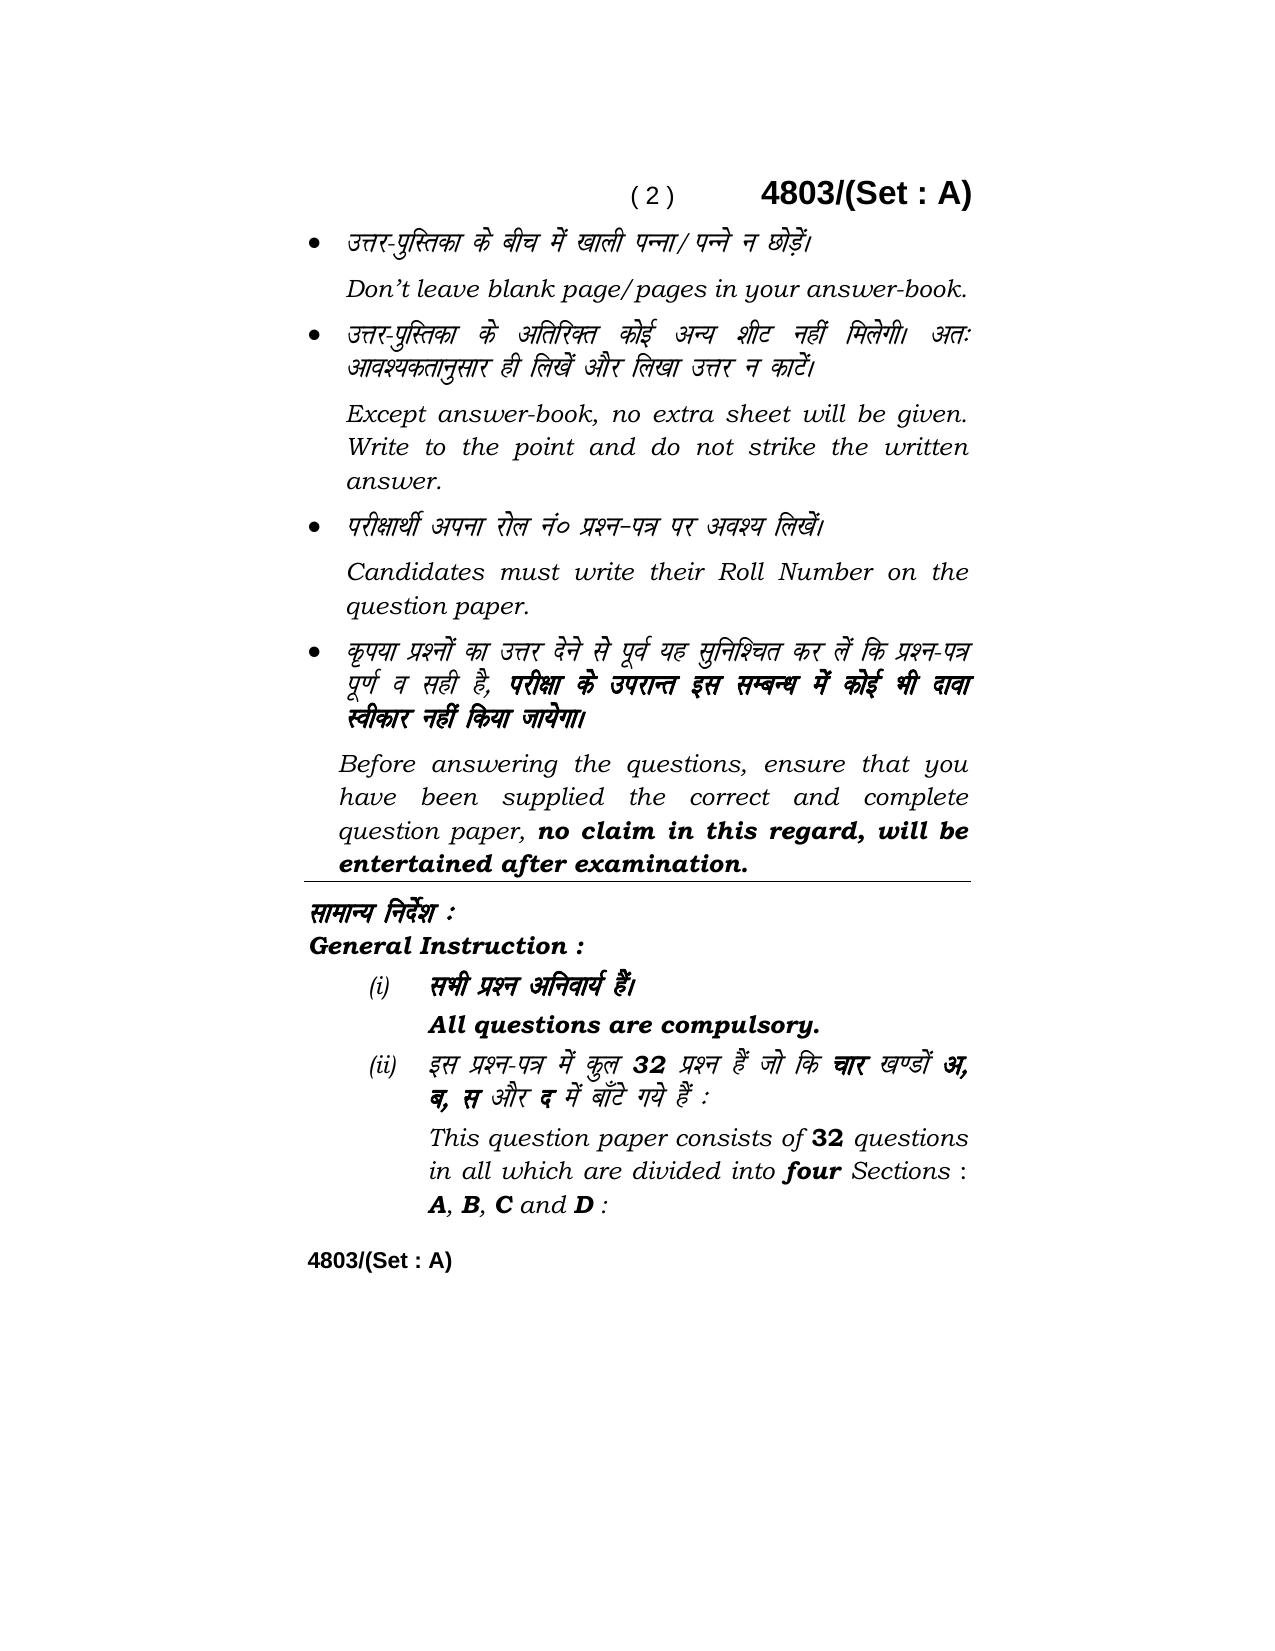 Haryana Board HBSE Class 10 Mathematics 2020 Question Paper - Page 2